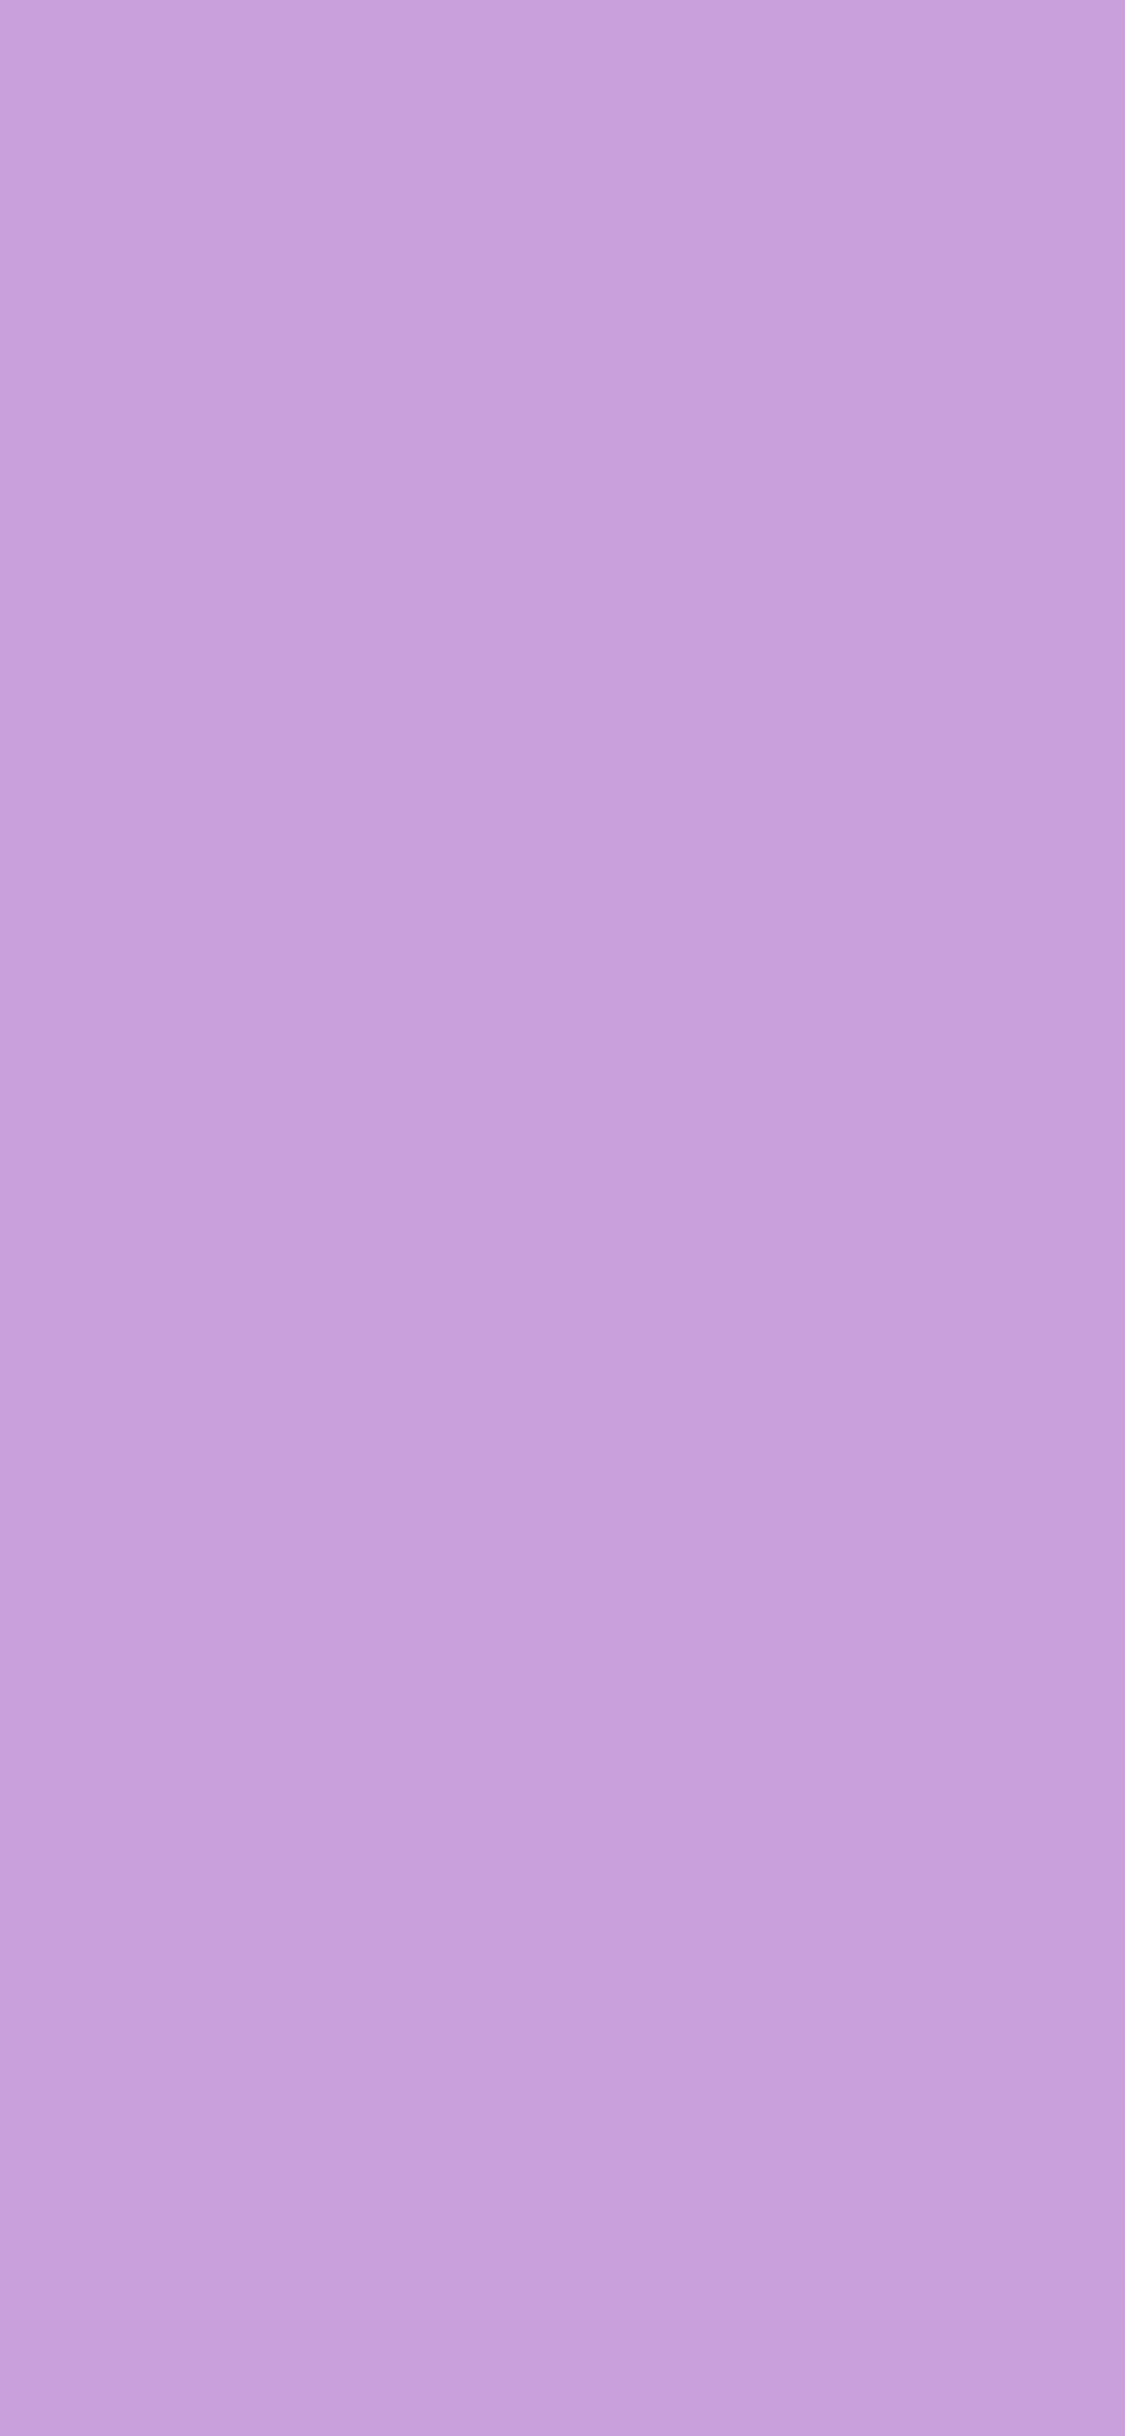 1125x2436 Wisteria Solid Color Background